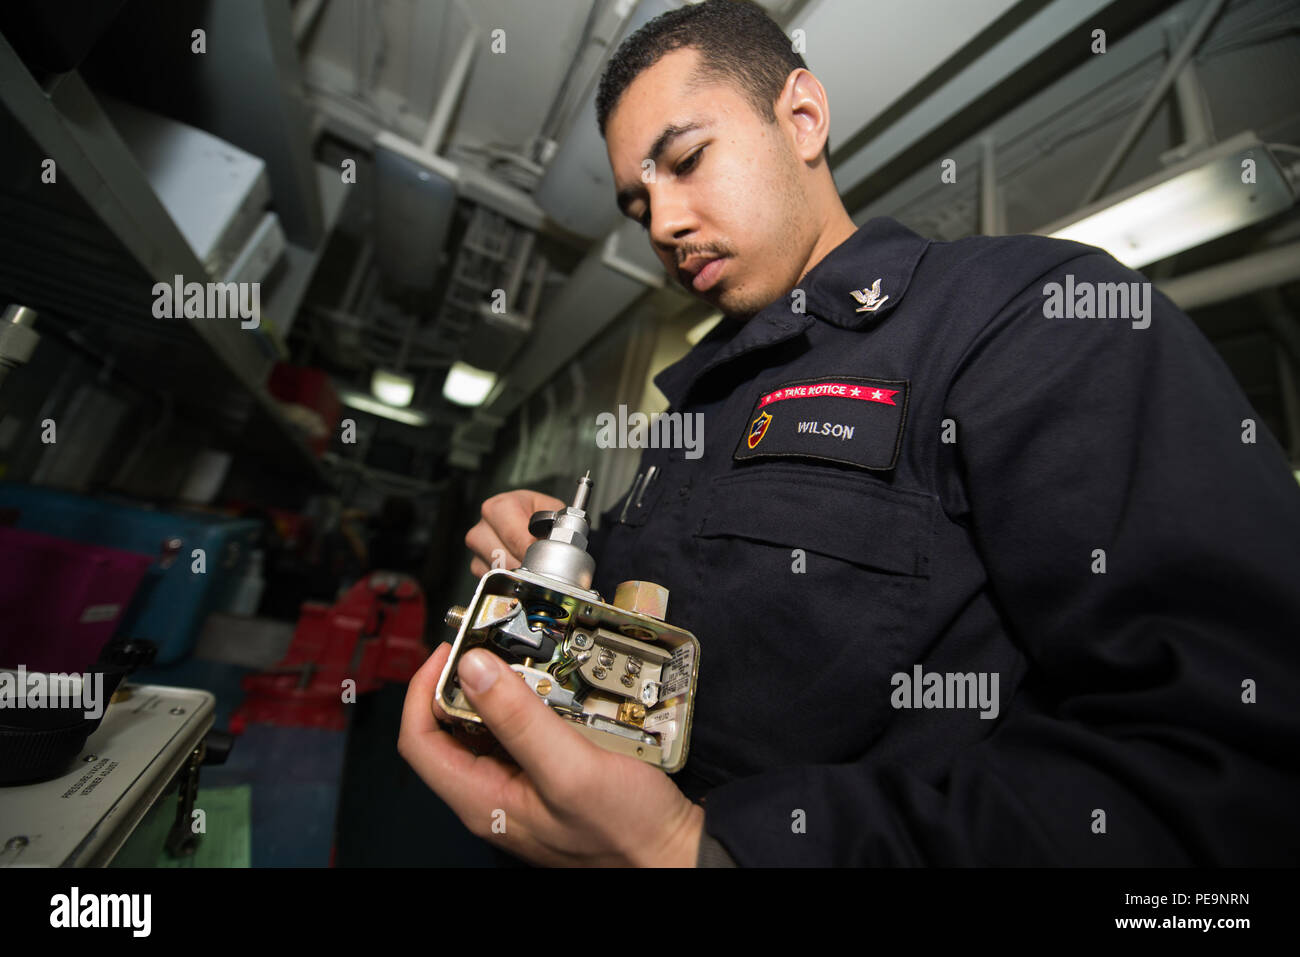 PACIFIC OCEAN (Nov. 25, 2015) Machinist's Mate 3rd Class Keanu Wilson  reassembles a pressure switch in the aviation calibration lab aboard the  Wasp-class amphibious assault ship USS Essex (LHD 2). Essex is